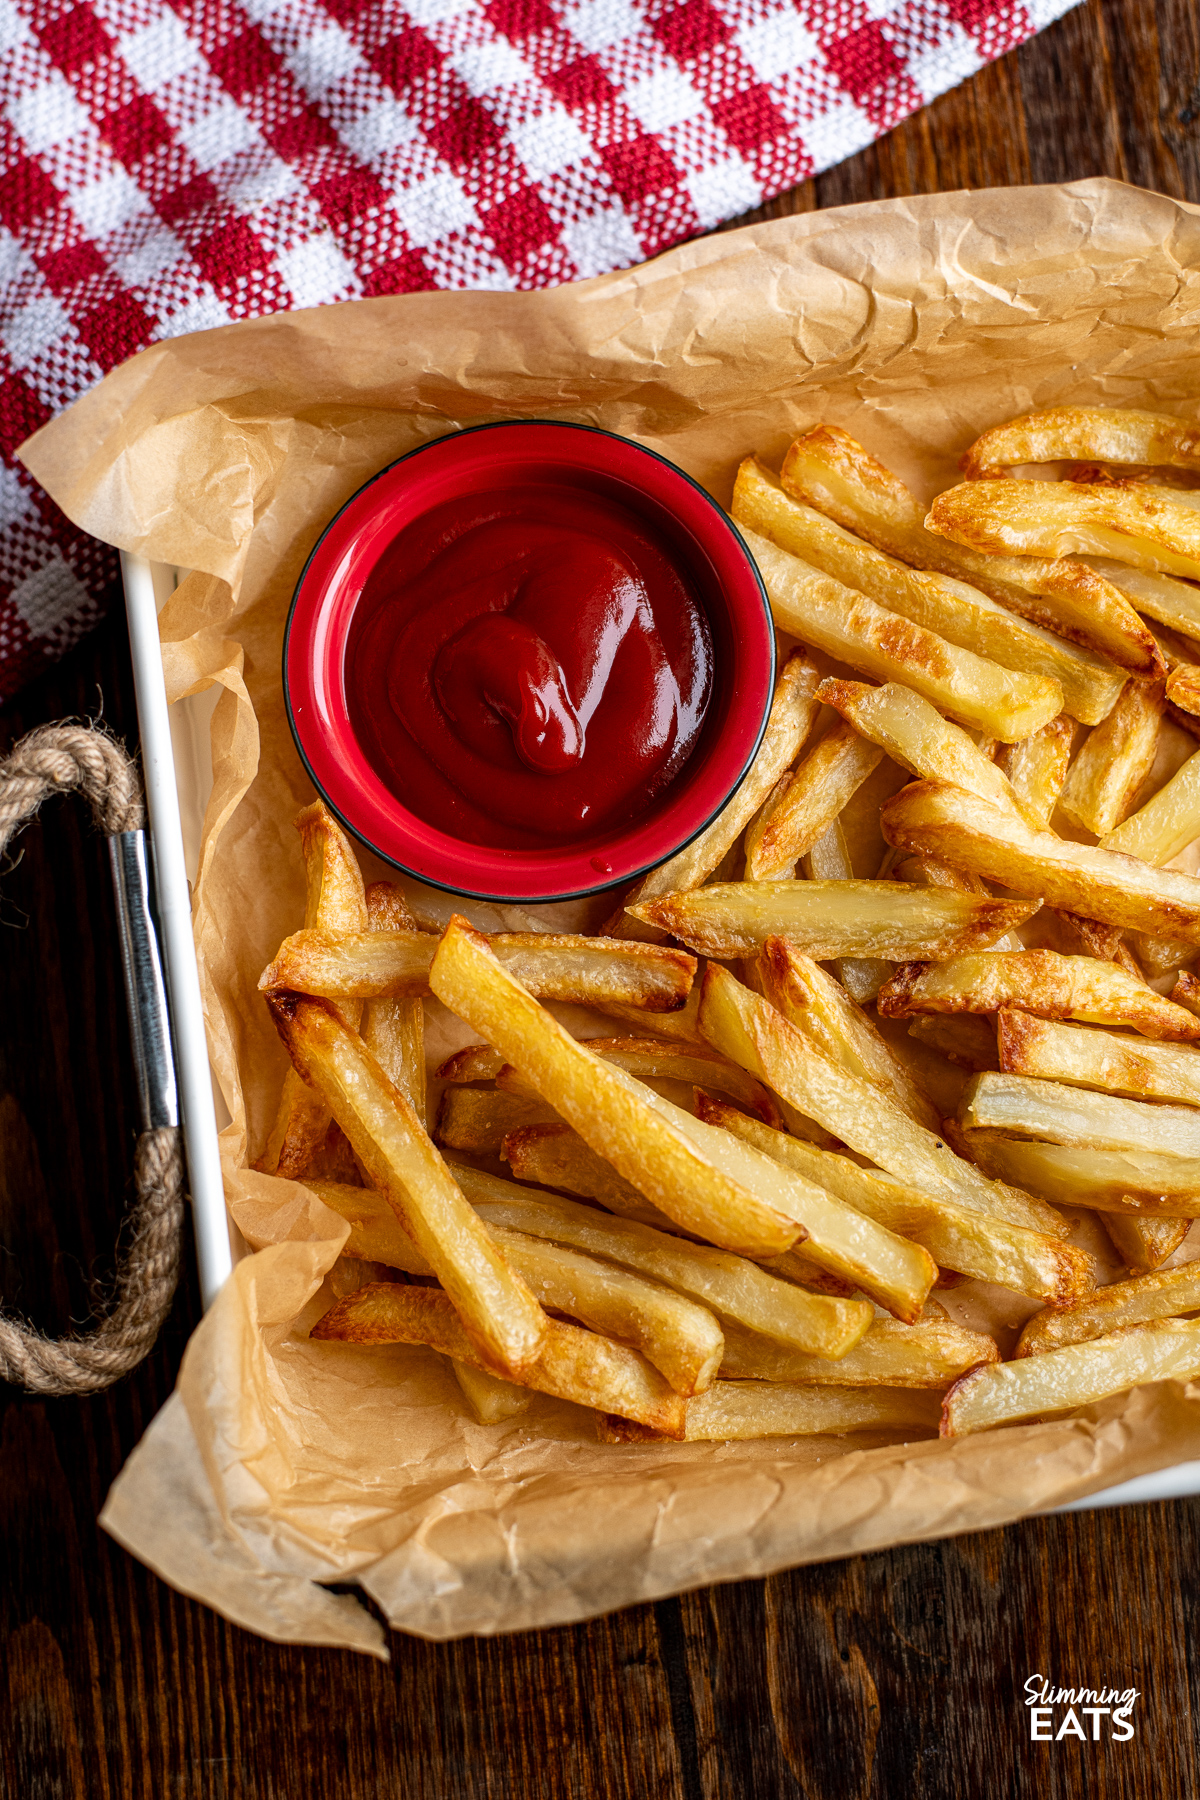 Golden oven baked fries arranged on parchment paper in a white tray with rope handles with a red dish with ketchup